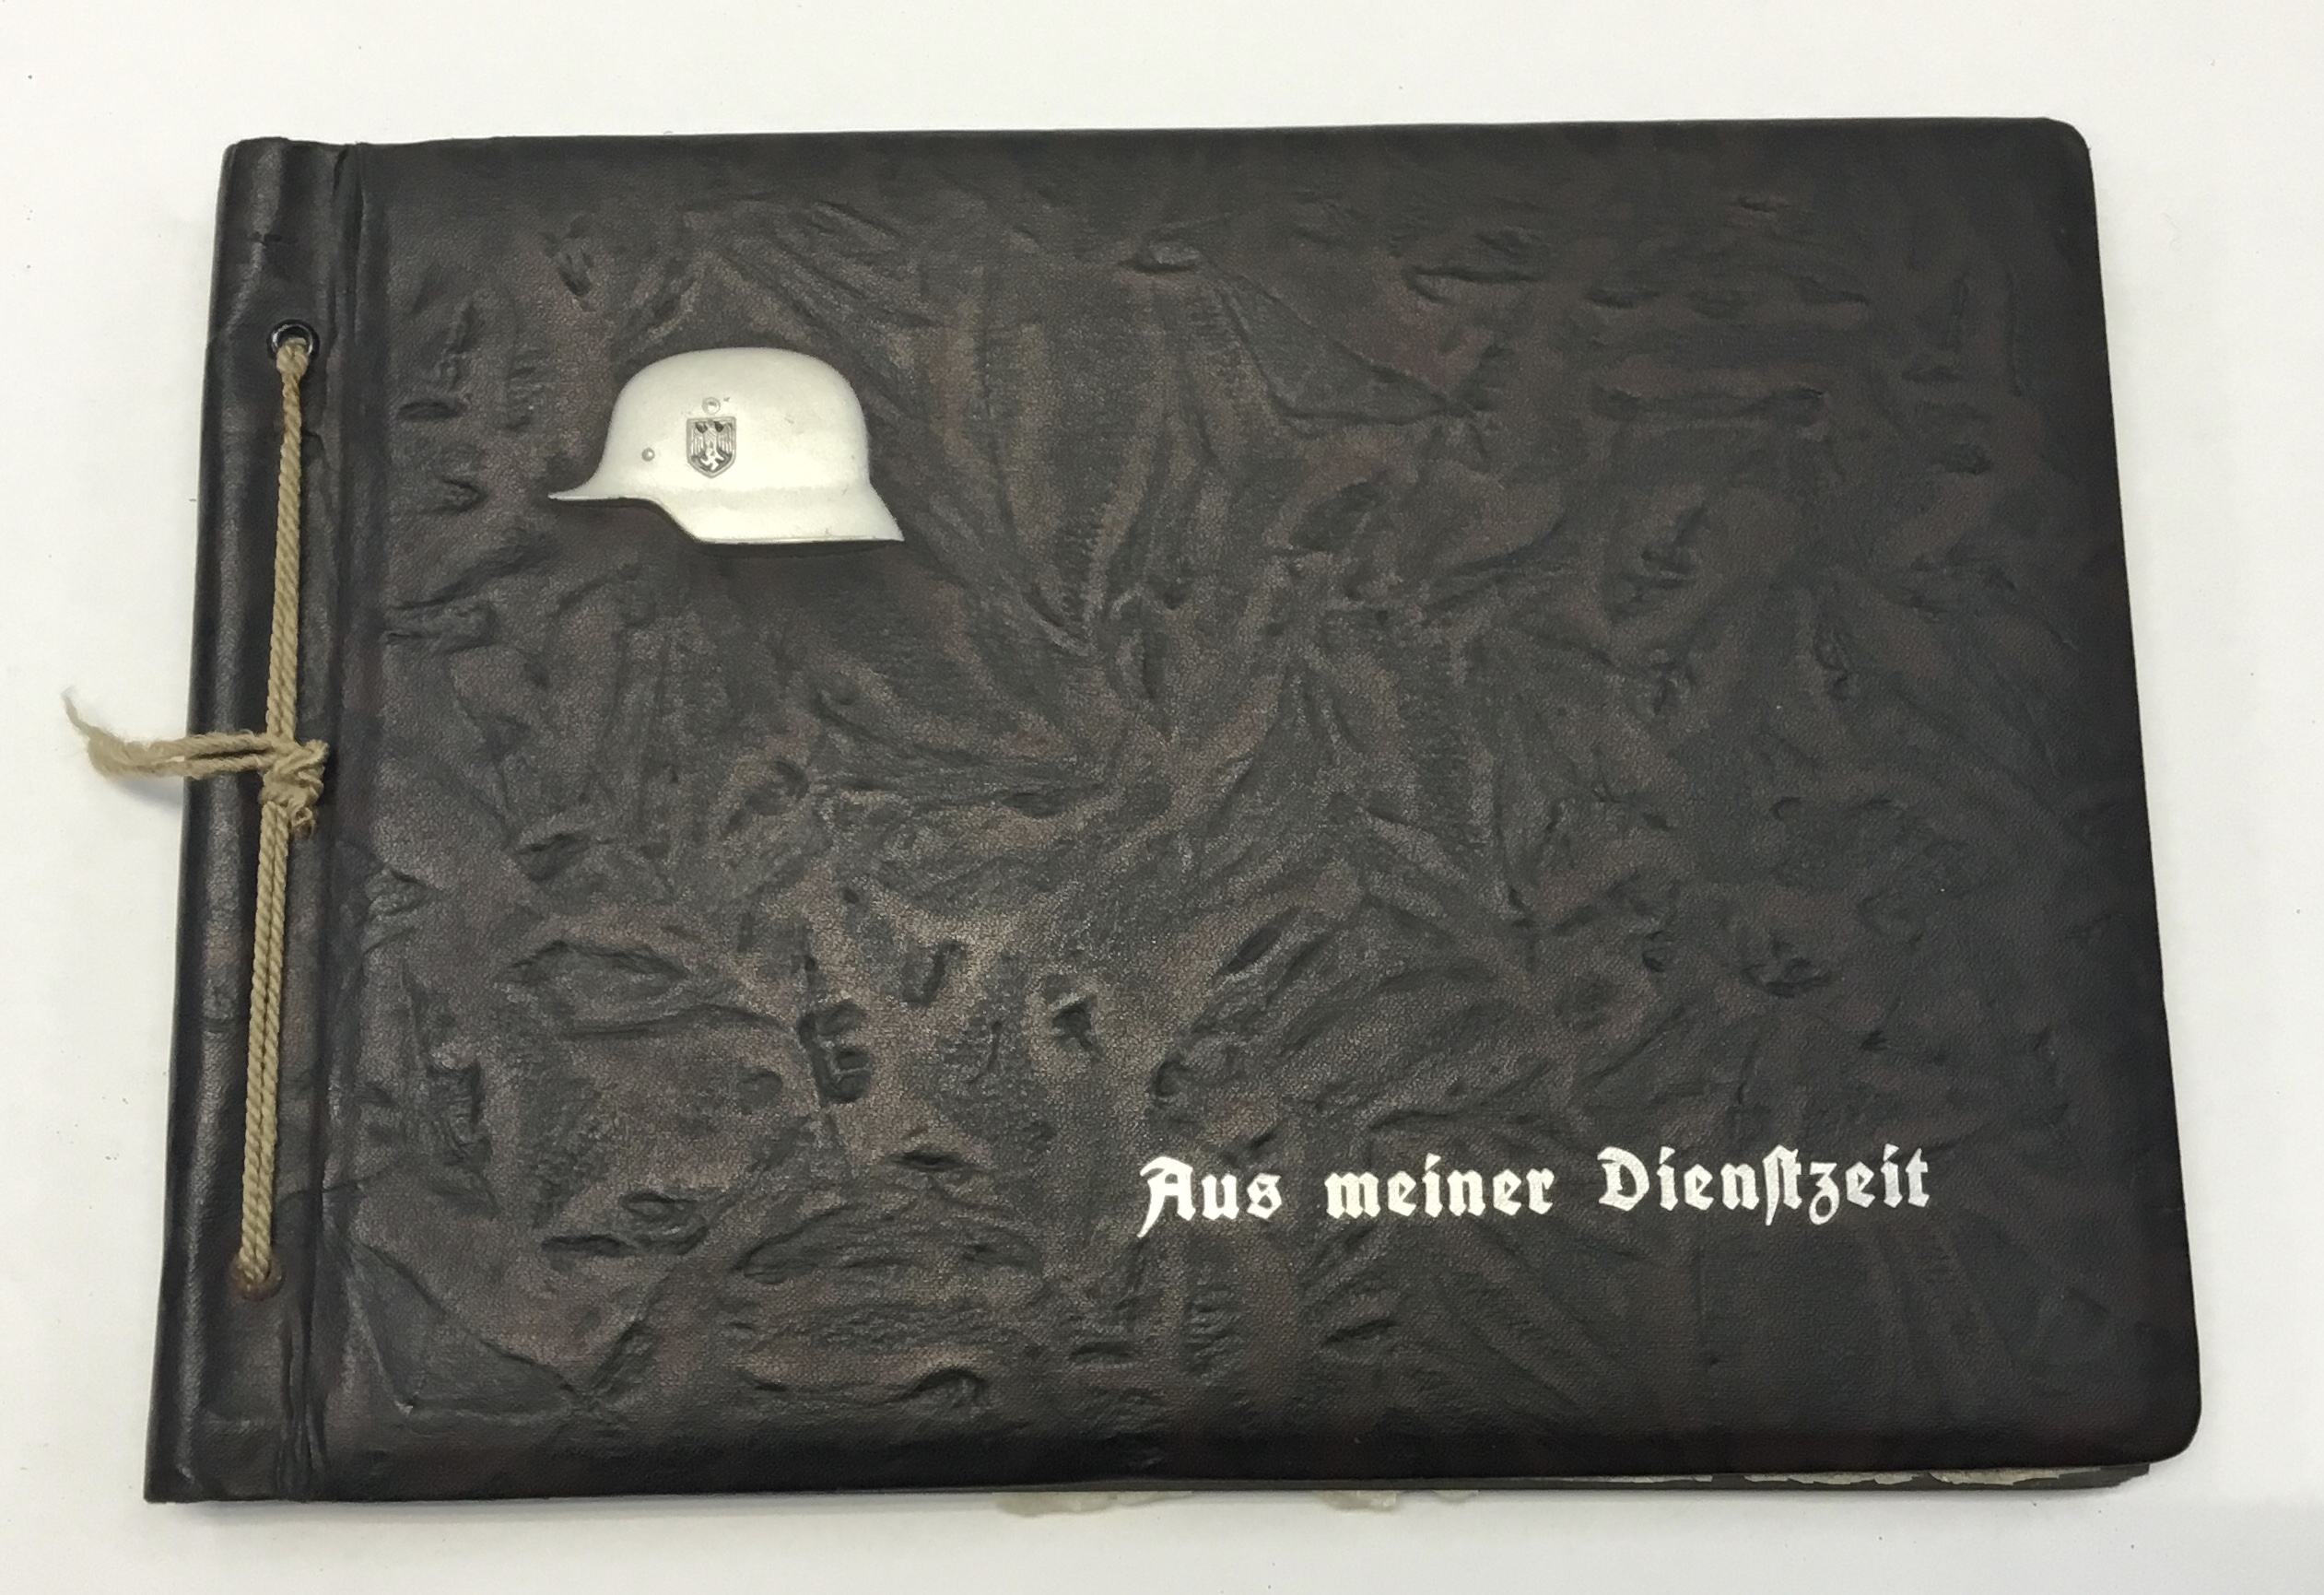 An interesting, and likely quite scarce, WW2 German propaganda photograph album, taken in occupied